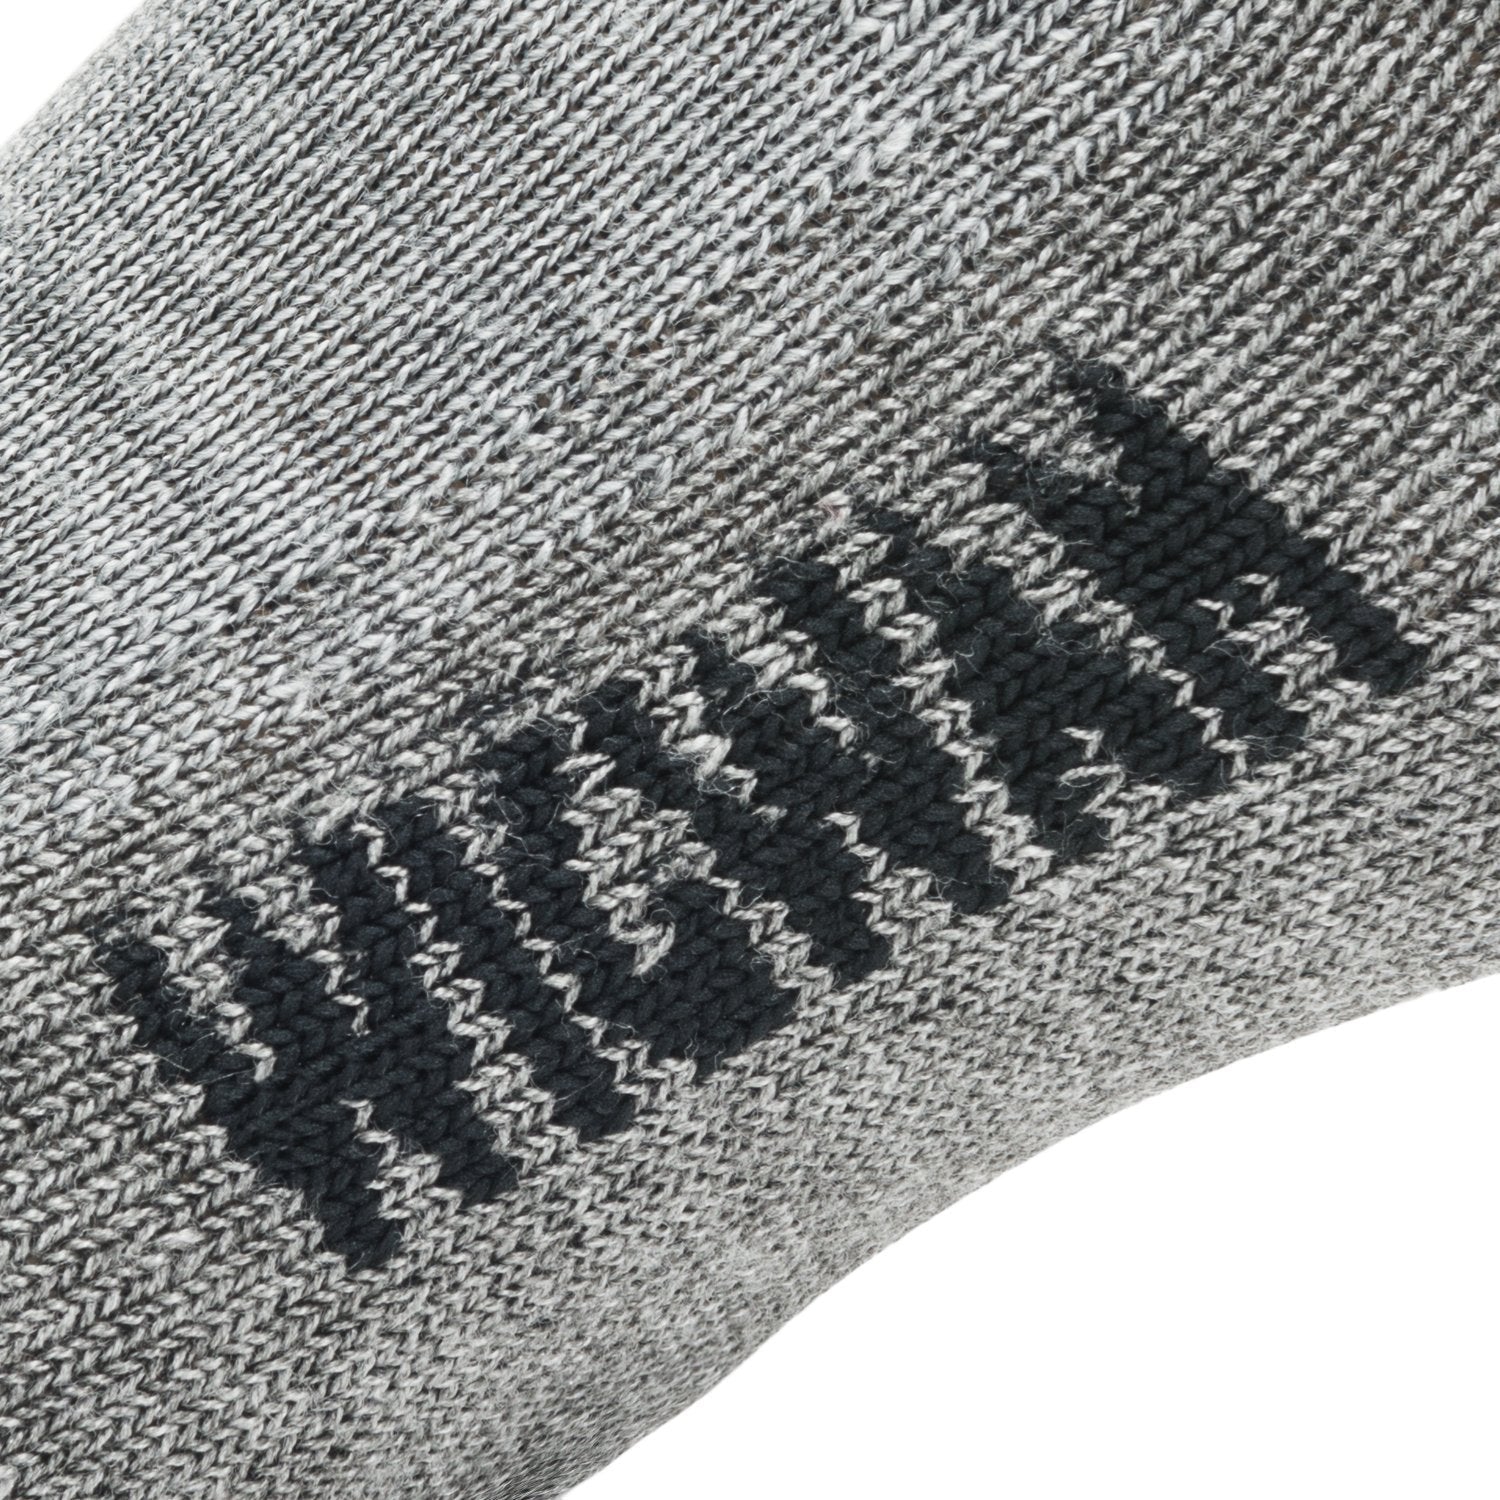 Hiking Outdoor Midweight Crew Sock - Light Grey Heather knit-in logo - made in The USA Wigwam Socks